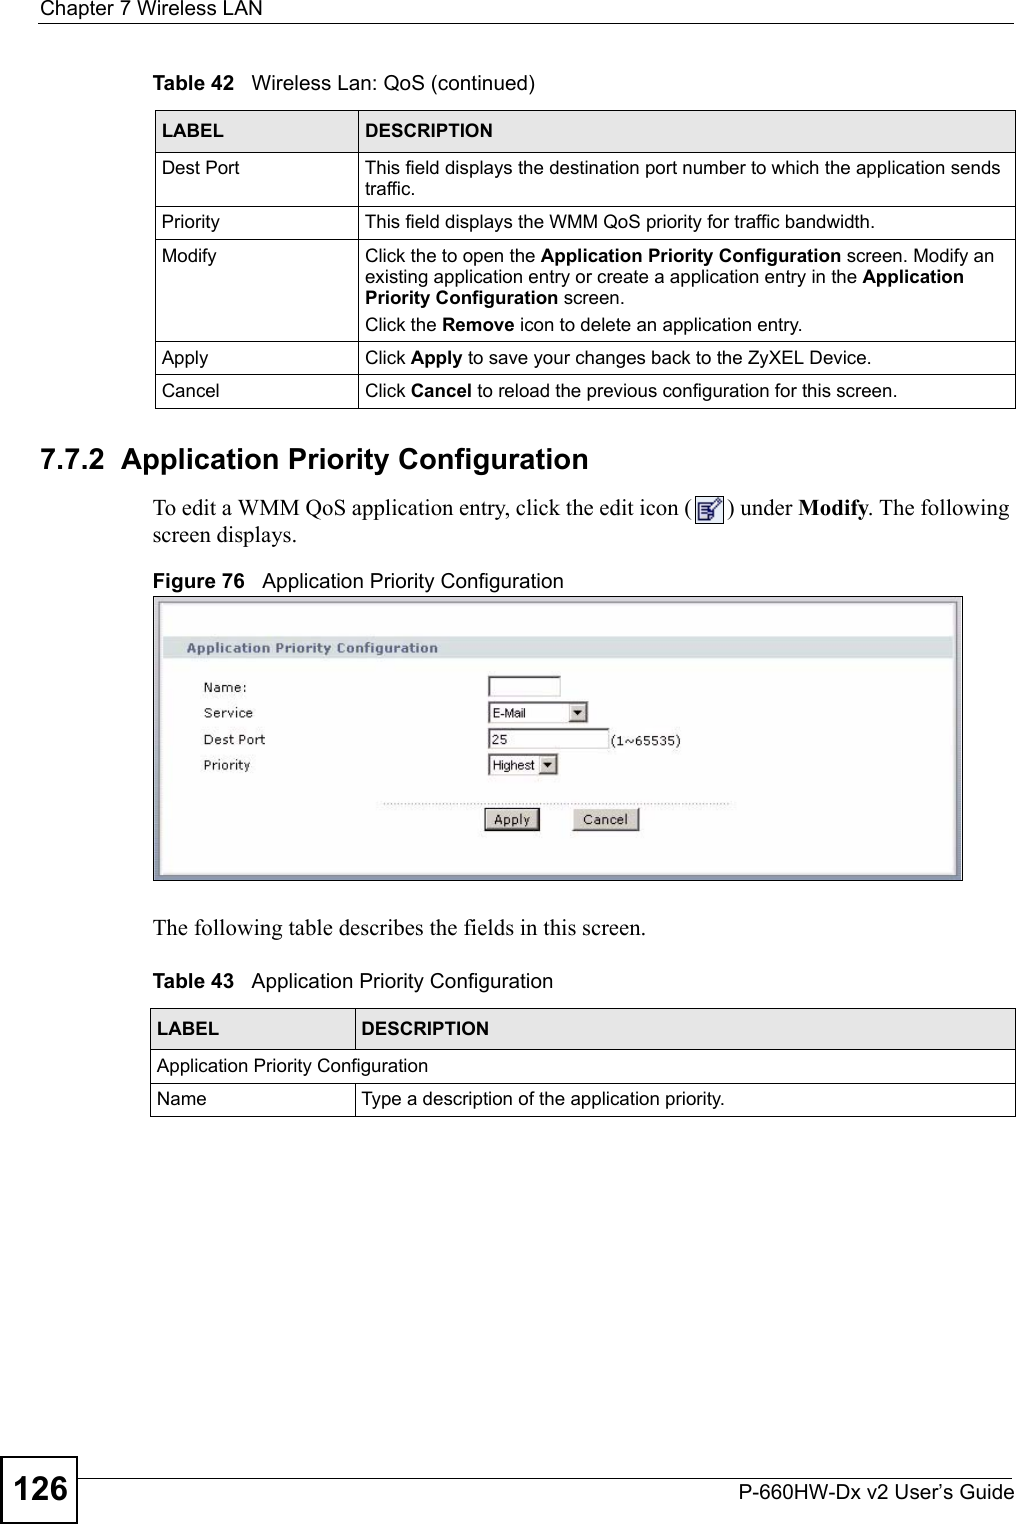 Chapter 7 Wireless LANP-660HW-Dx v2 User’s Guide1267.7.2  Application Priority ConfigurationTo edit a WMM QoS application entry, click the edit icon ( ) under Modify. The following screen displays.Figure 76   Application Priority ConfigurationThe following table describes the fields in this screen.Dest Port This field displays the destination port number to which the application sends traffic.Priority This field displays the WMM QoS priority for traffic bandwidth.Modify Click the to open the Application Priority Configuration screen. Modify an existing application entry or create a application entry in the Application Priority Configuration screen.Click the Remove icon to delete an application entry.Apply Click Apply to save your changes back to the ZyXEL Device.Cancel Click Cancel to reload the previous configuration for this screen.Table 42   Wireless Lan: QoS (continued)LABEL DESCRIPTIONTable 43   Application Priority ConfigurationLABEL DESCRIPTIONApplication Priority ConfigurationName Type a description of the application priority.